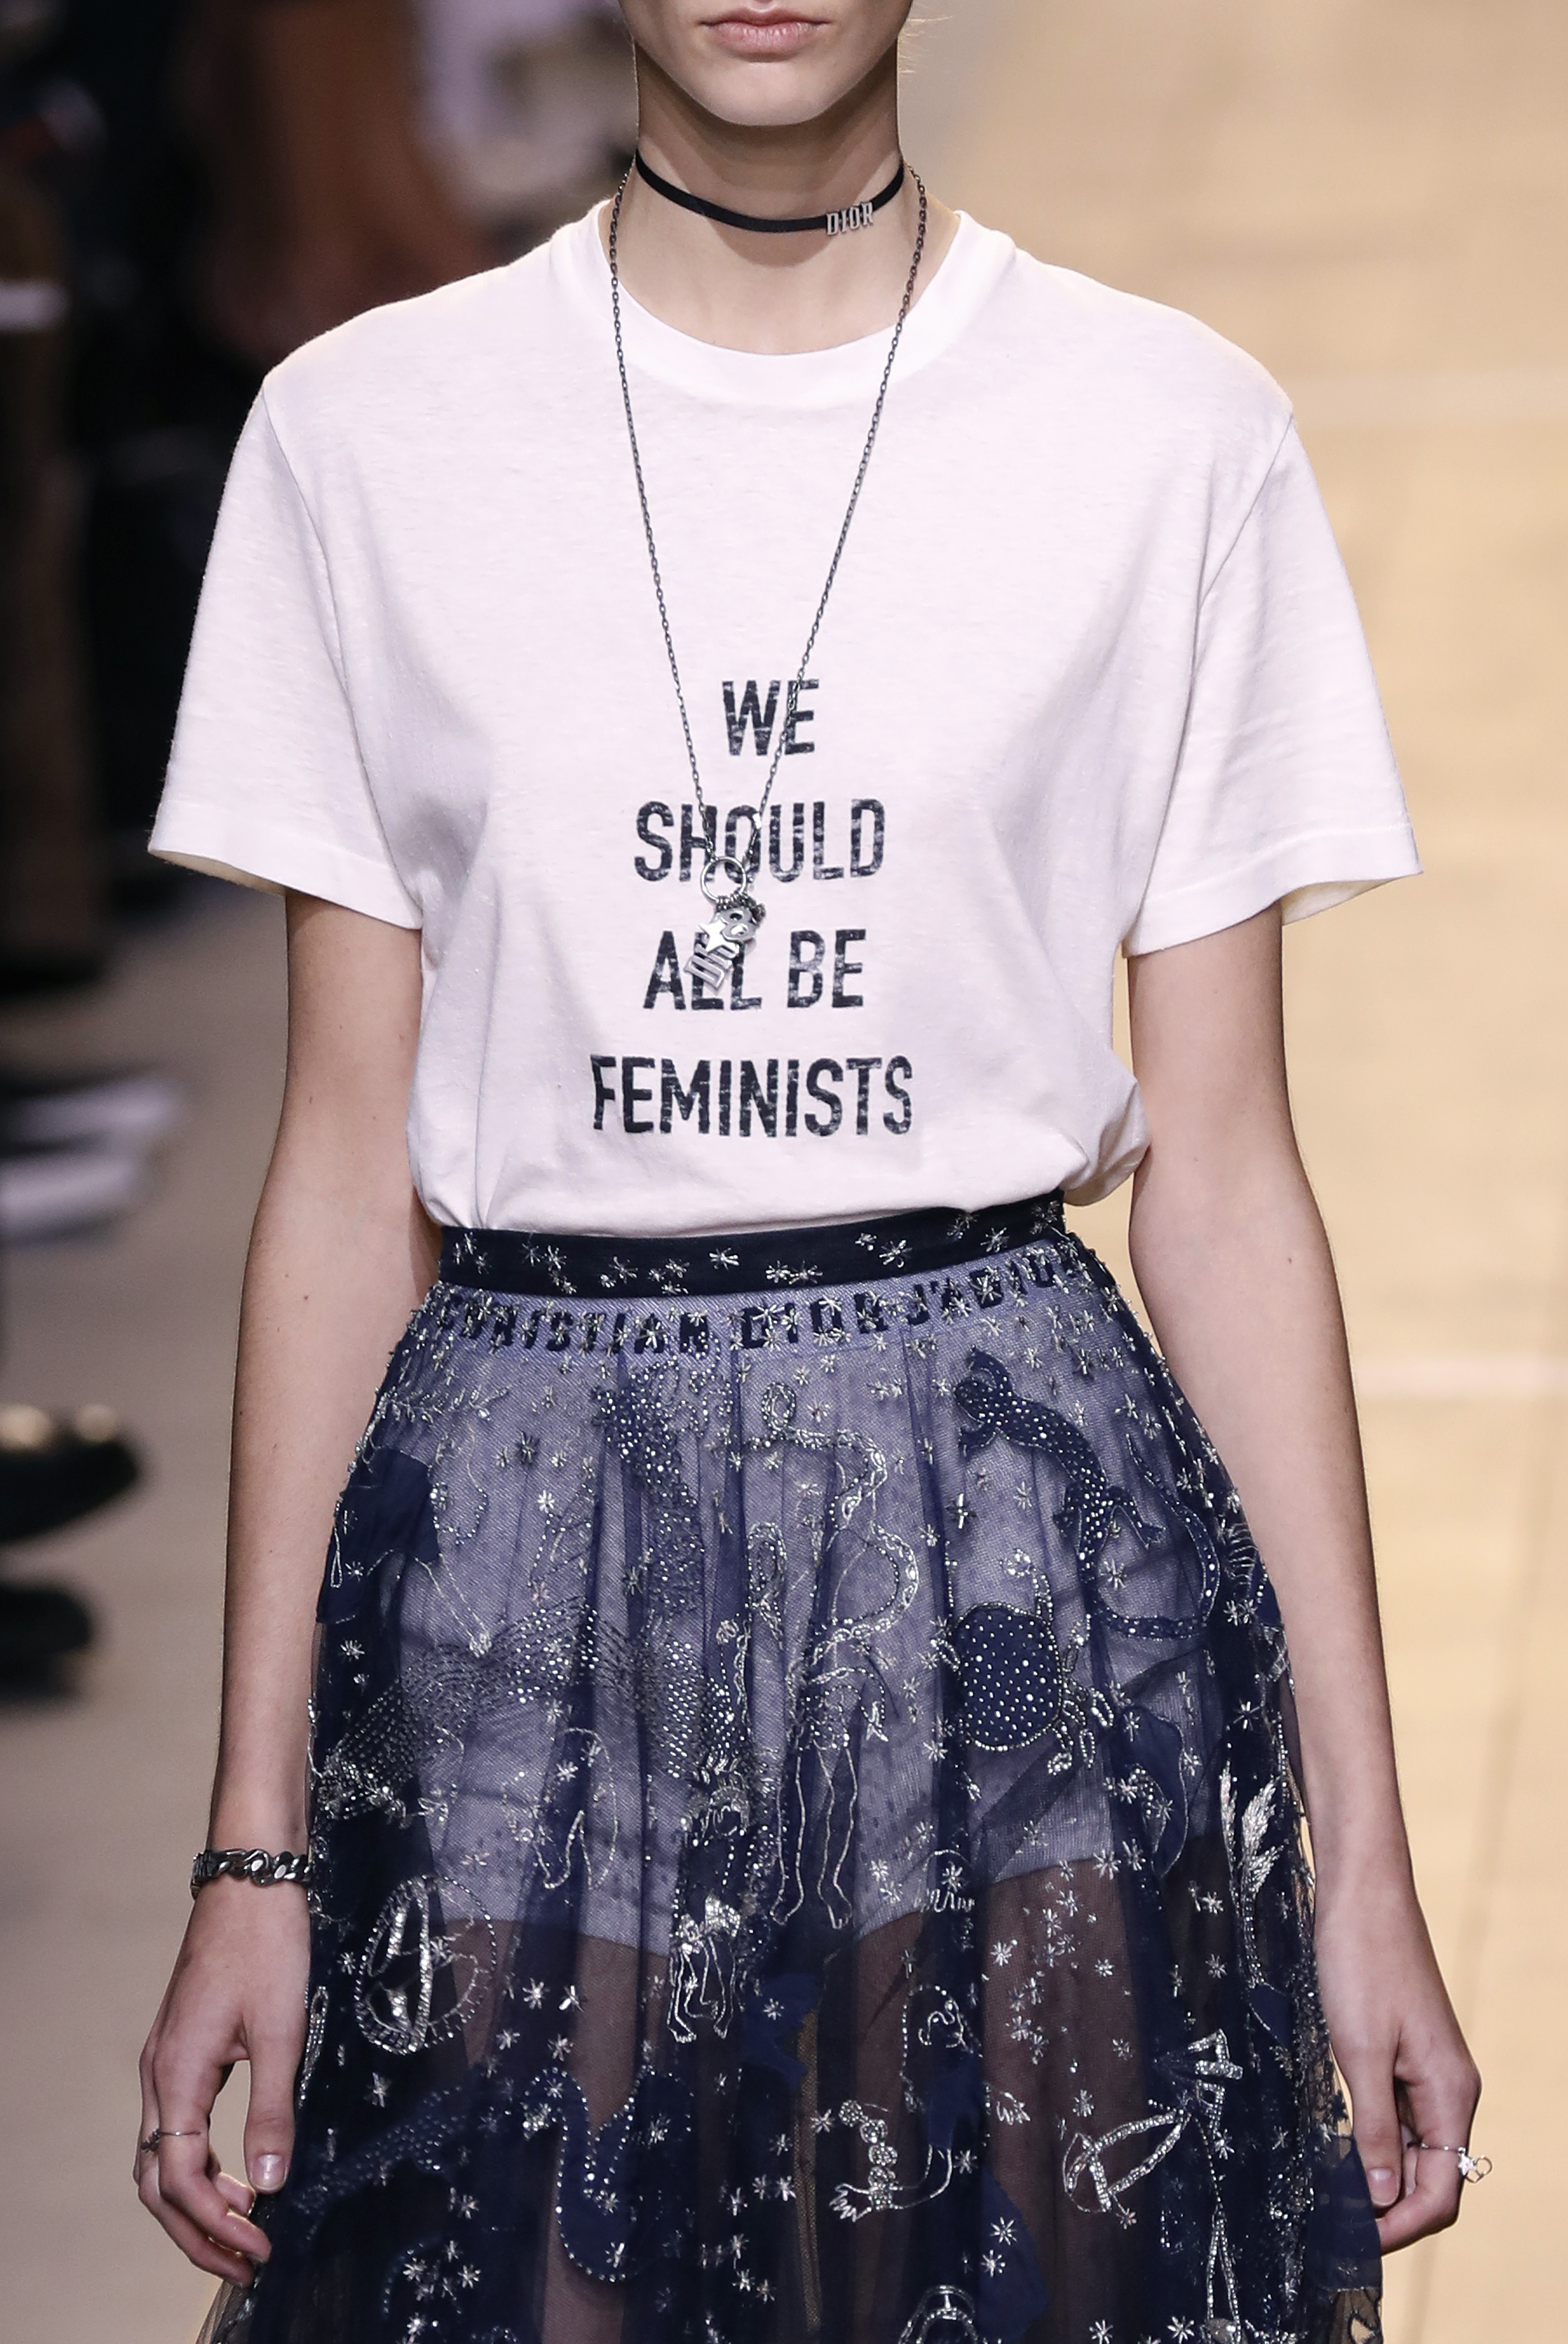 Dior S First Female Designer Included A Feminist T Shirt On The Runway At Paris Fashion Week Photos